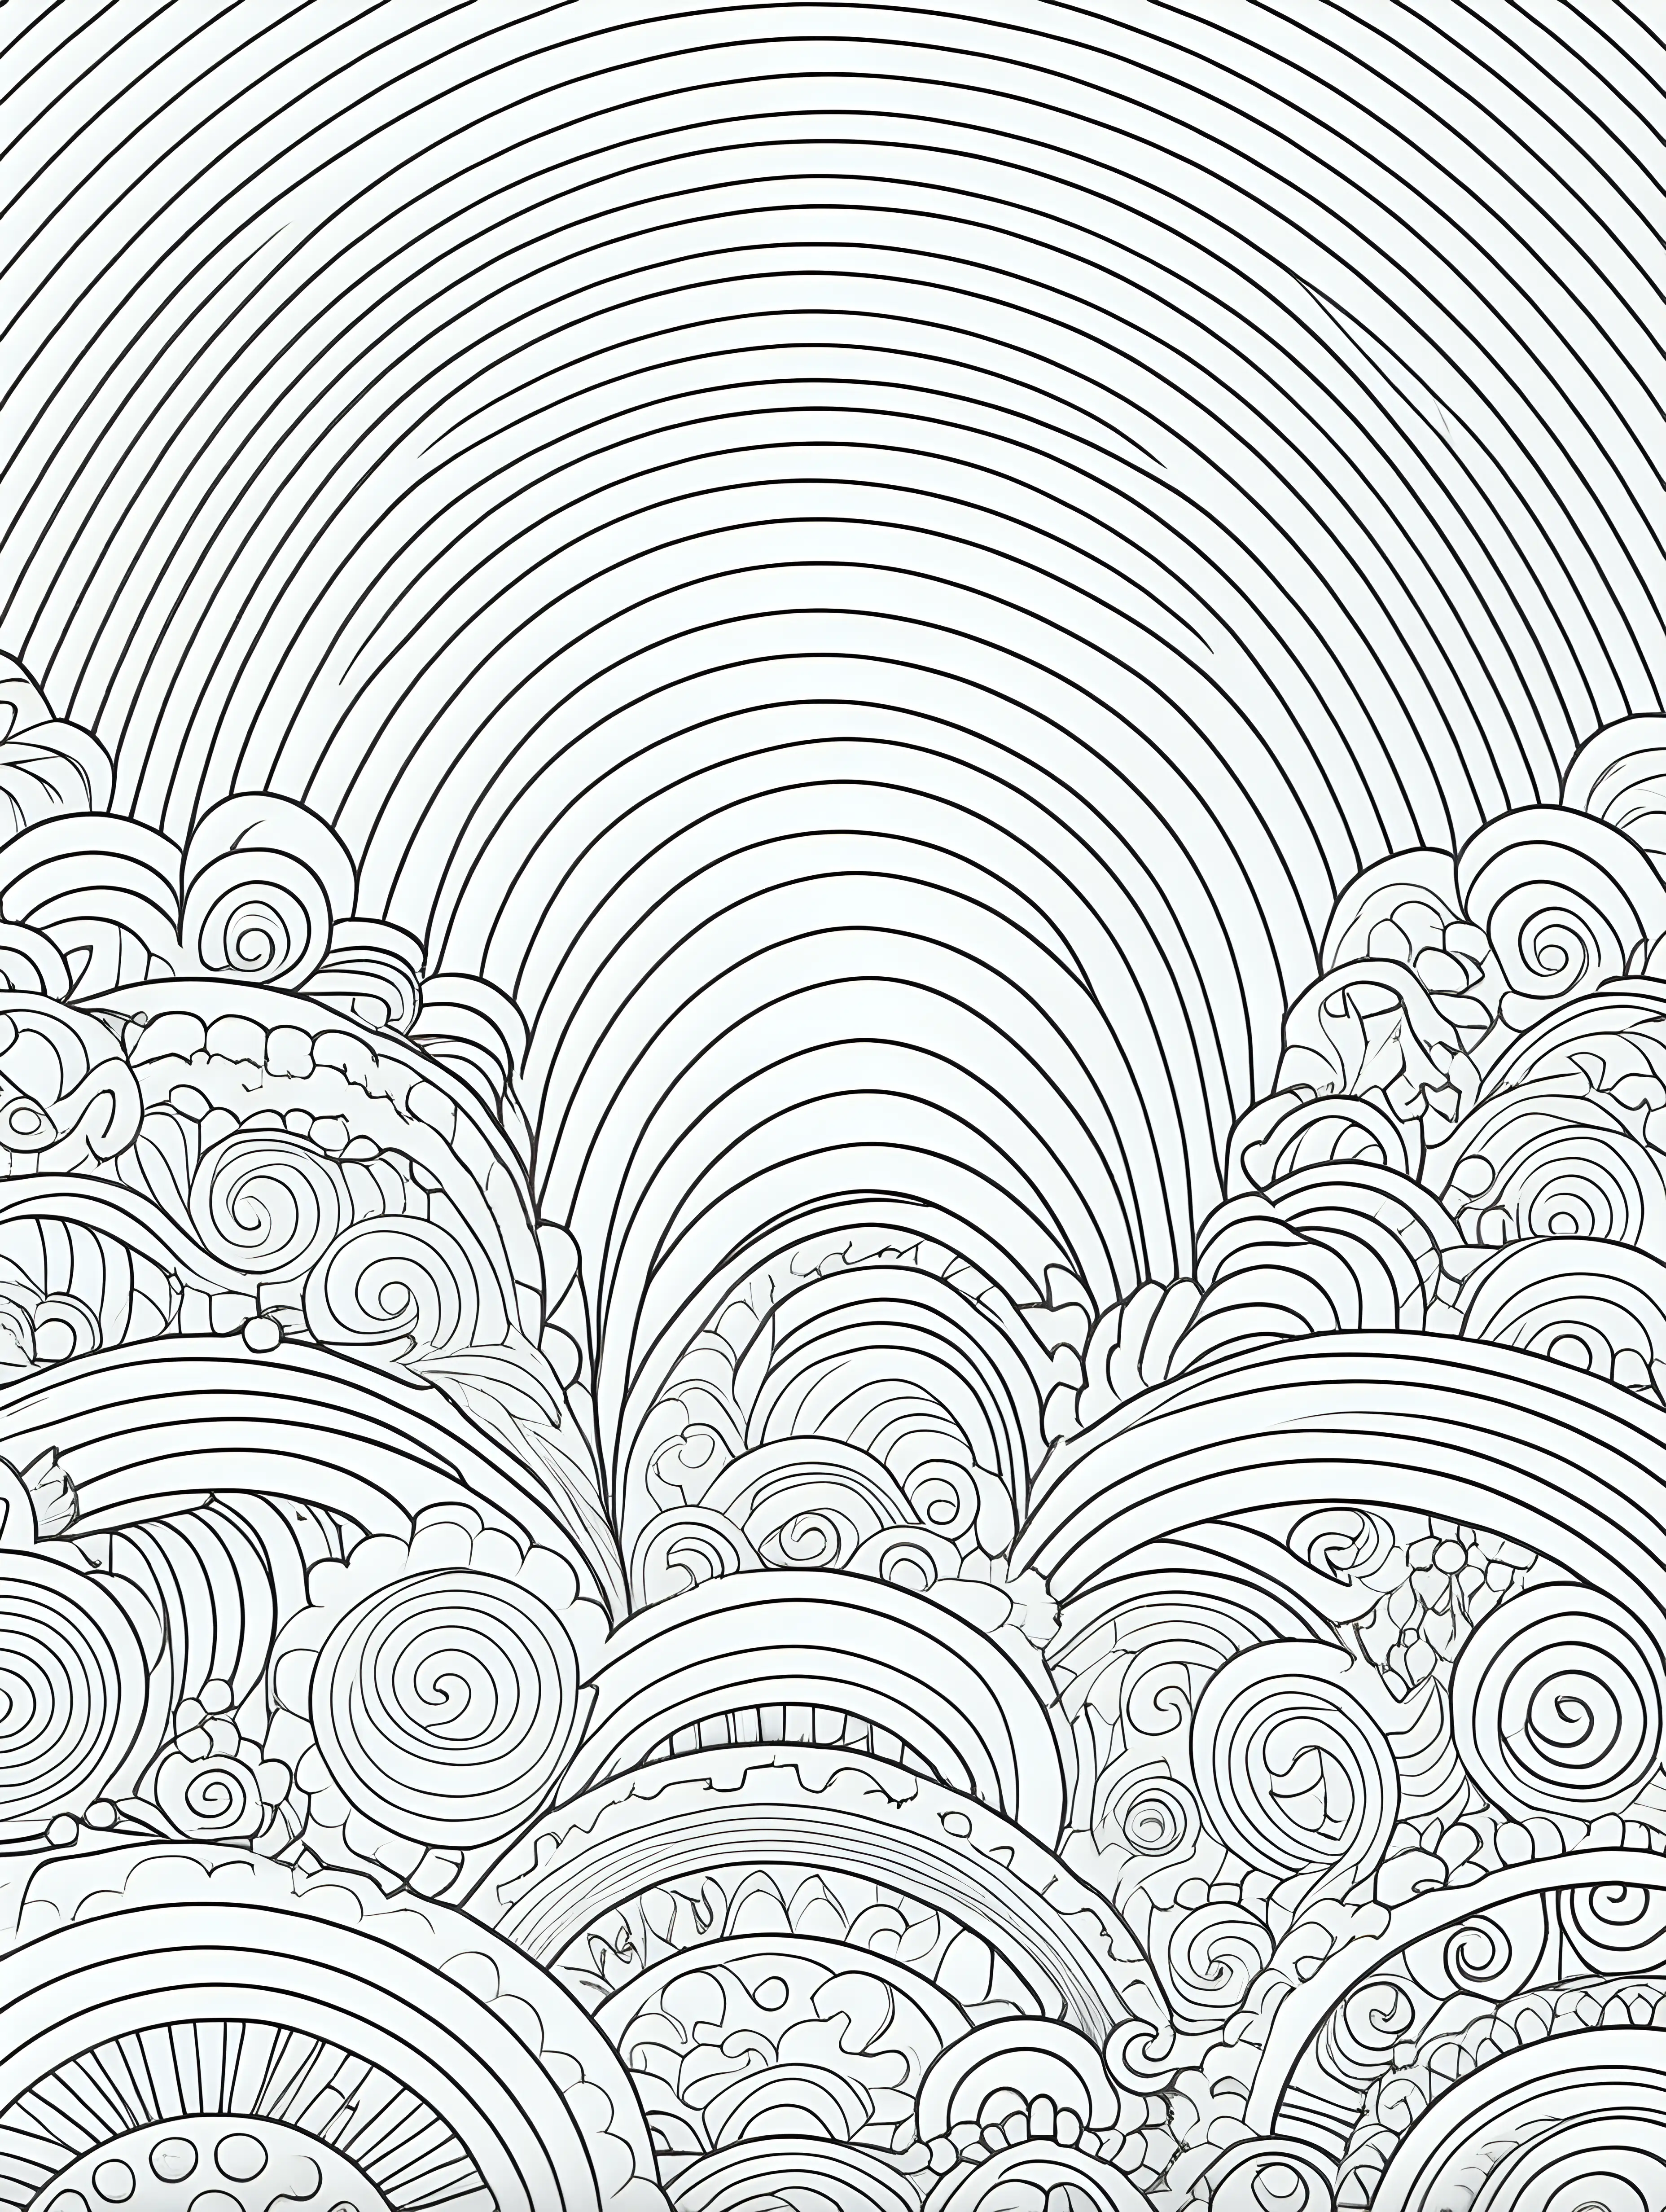 rainbow patterns, coloring page, no color